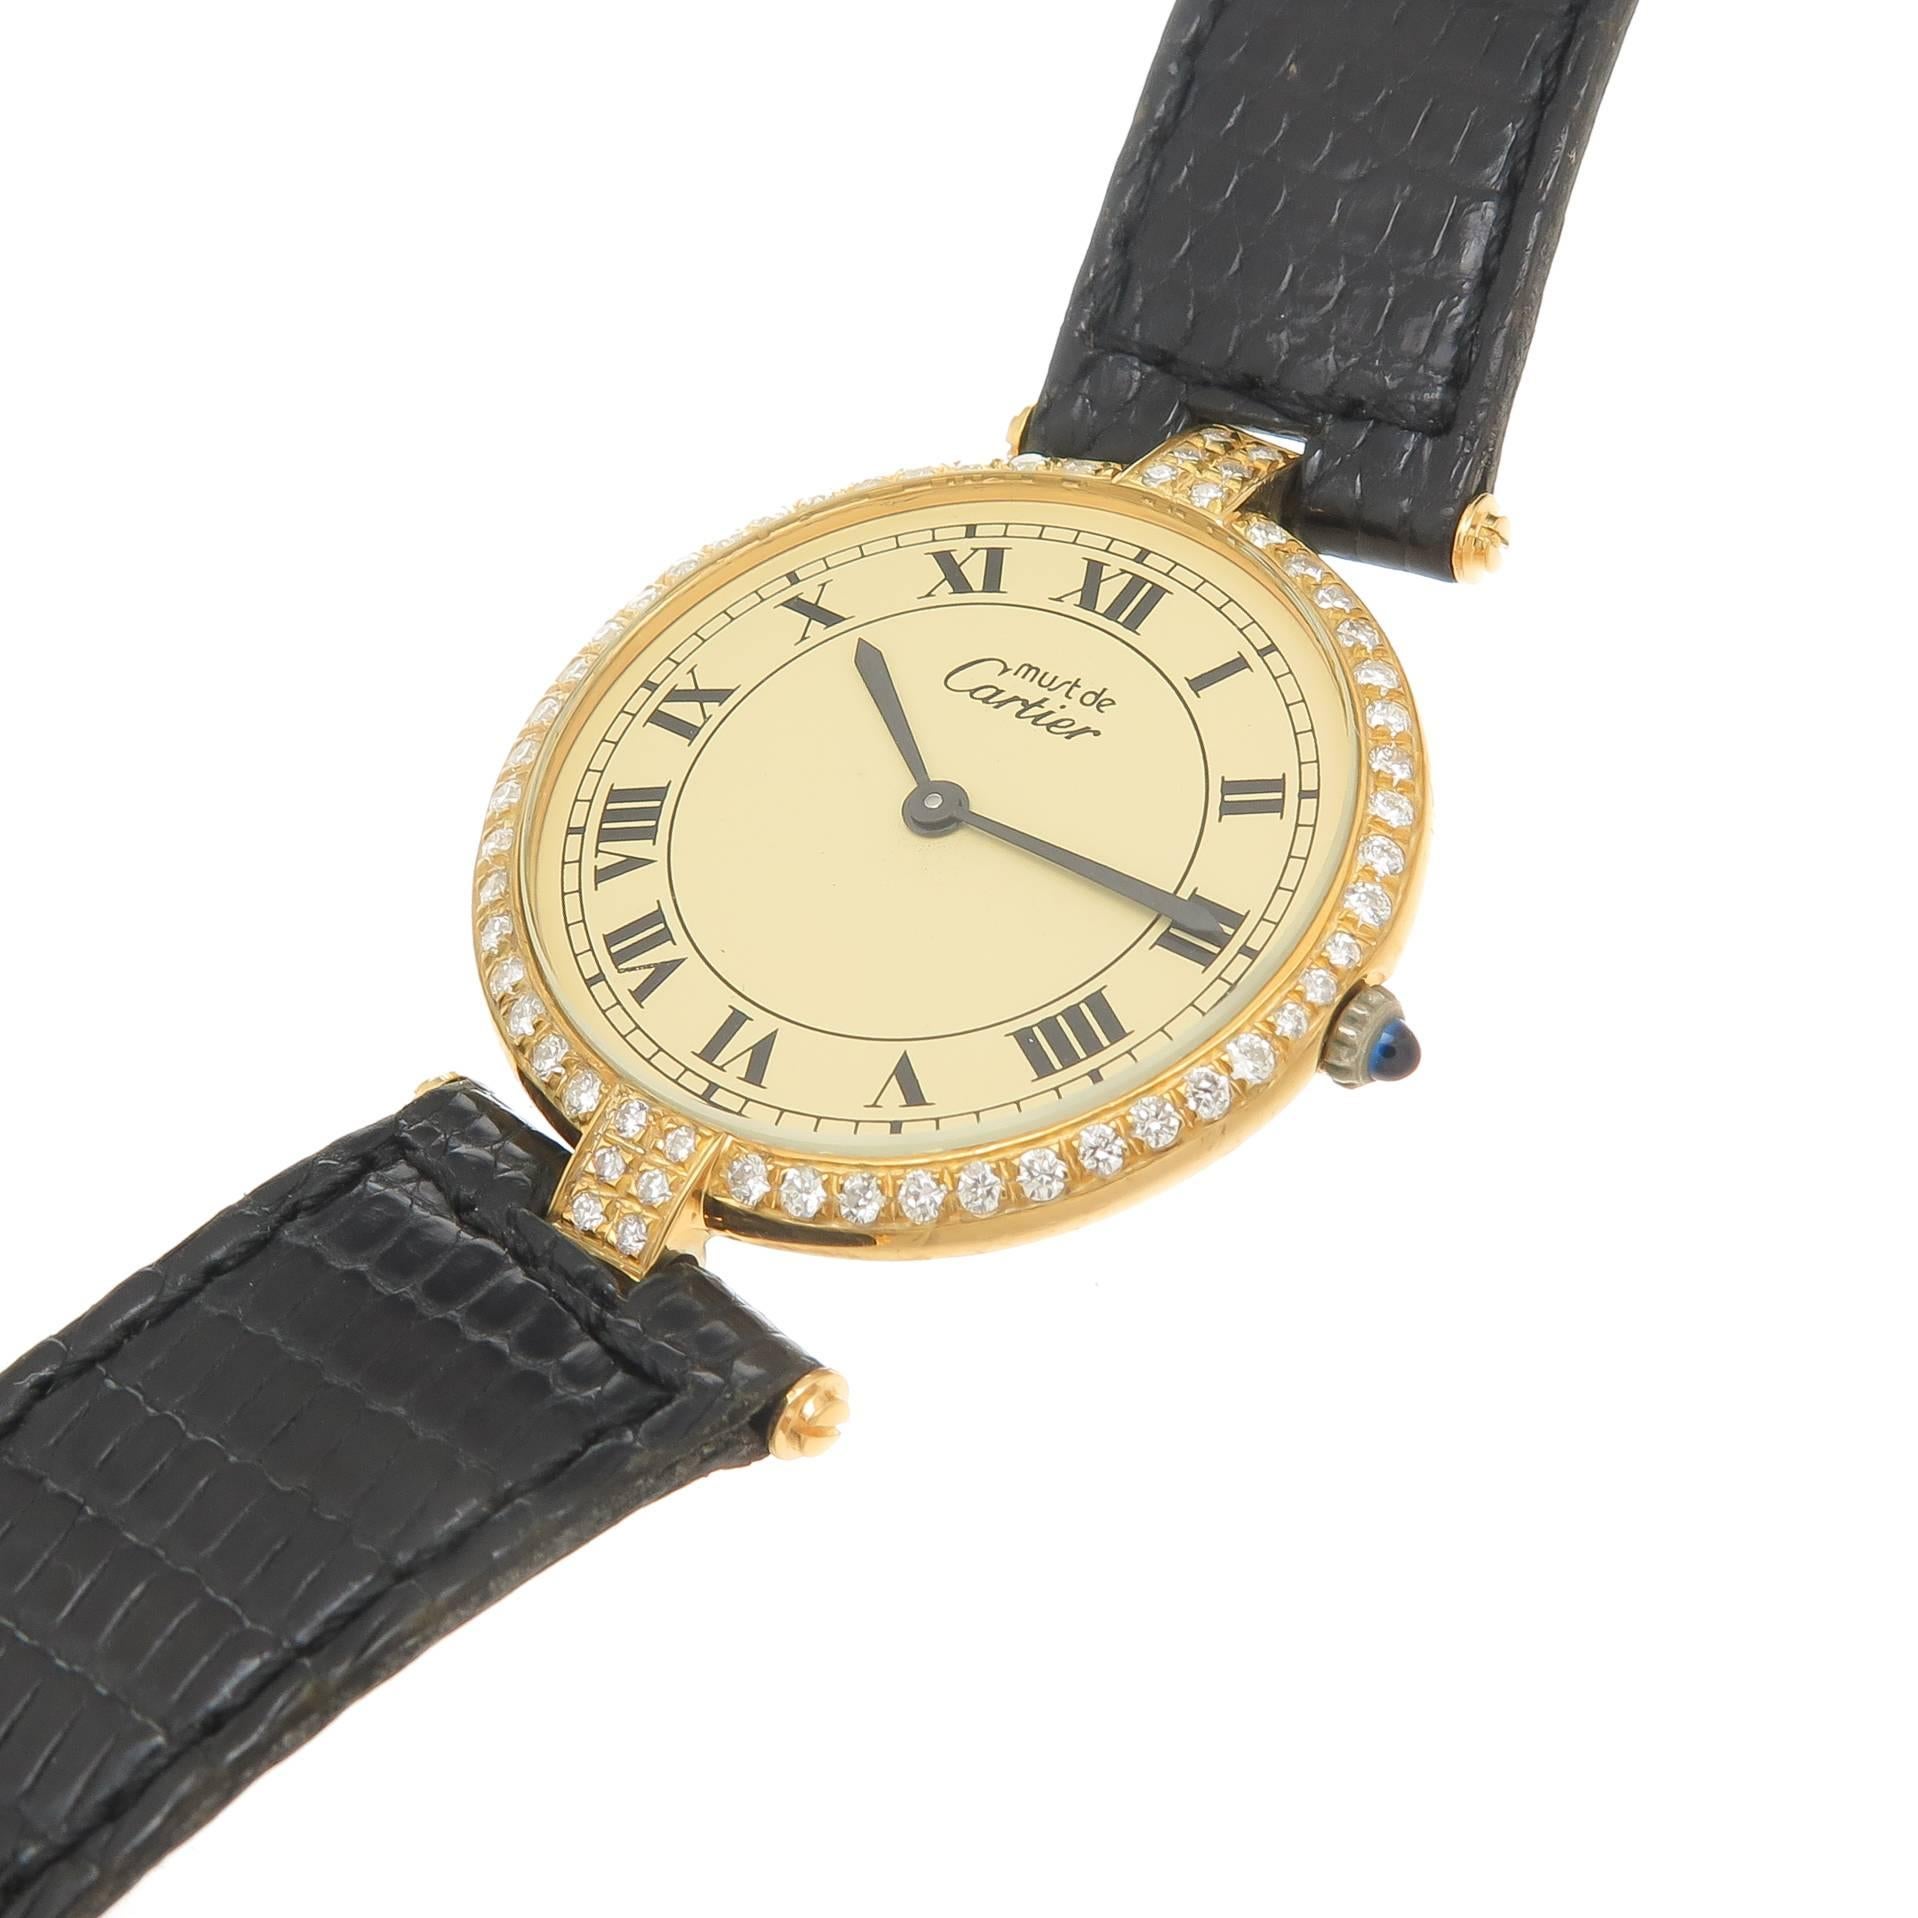 Circa 1990 Cartier Vendome Diamond set wrist Watch, 30 MM Vermeil, Gold Plated Sterling silver, water resistant case. Later Set with Round Brilliant cut diamonds totaling approximately 1 Carat. Manual wind mechanical Movement, Cream color Dial with